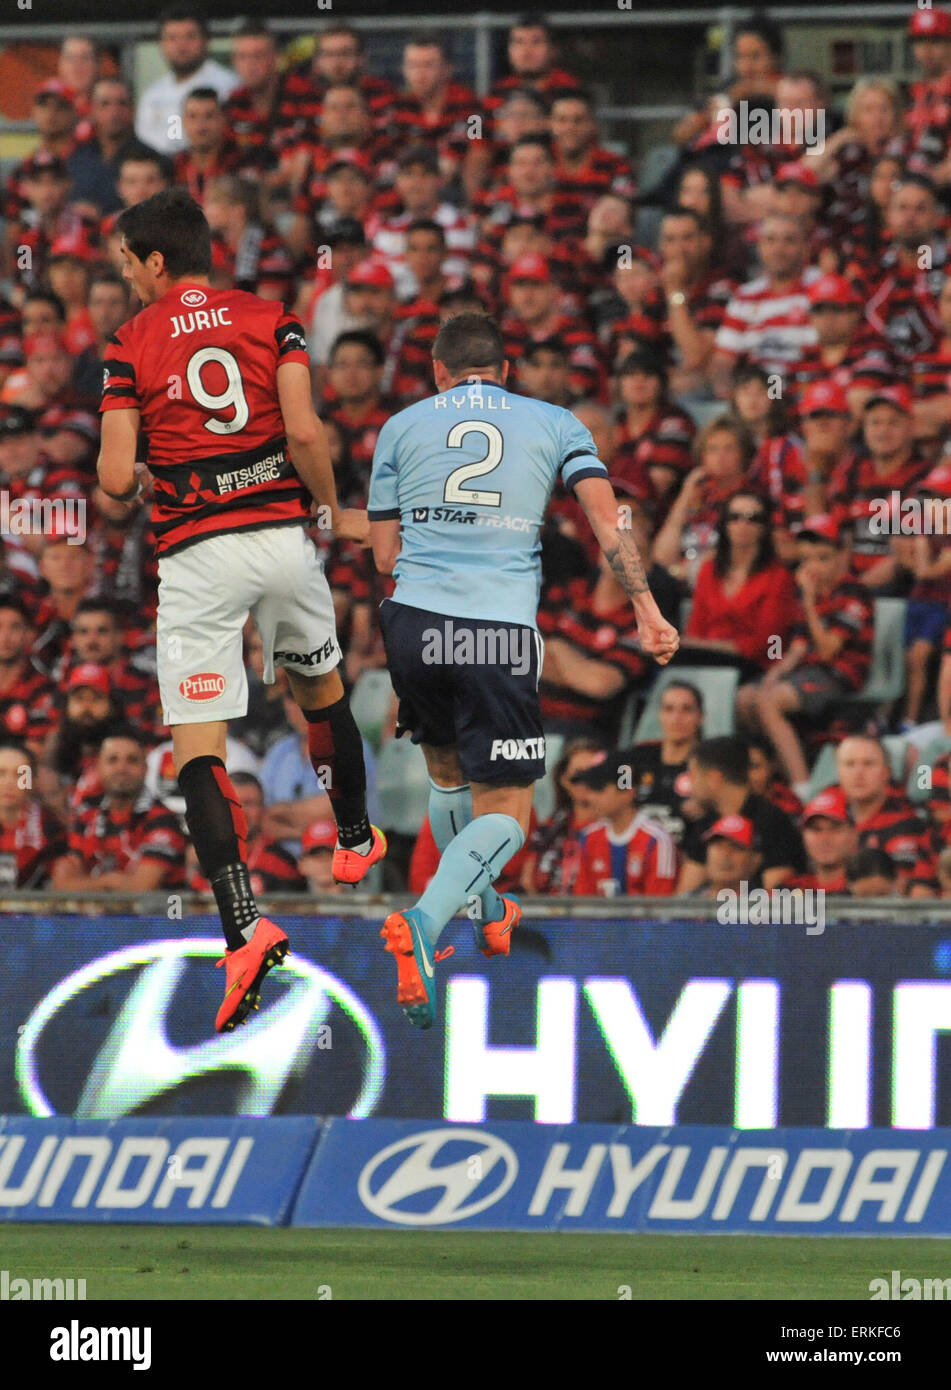 Sydney FC and the Western Sydney Wanderers played out a 1-1 draw in an entertaining A-League game  Featuring: Tomi Juric and Seb Ryall jump for the ball Sydney FC V Western S Where: Sydney, Australia When: 29 Nov 2014 Credit: WENN.com Stock Photo